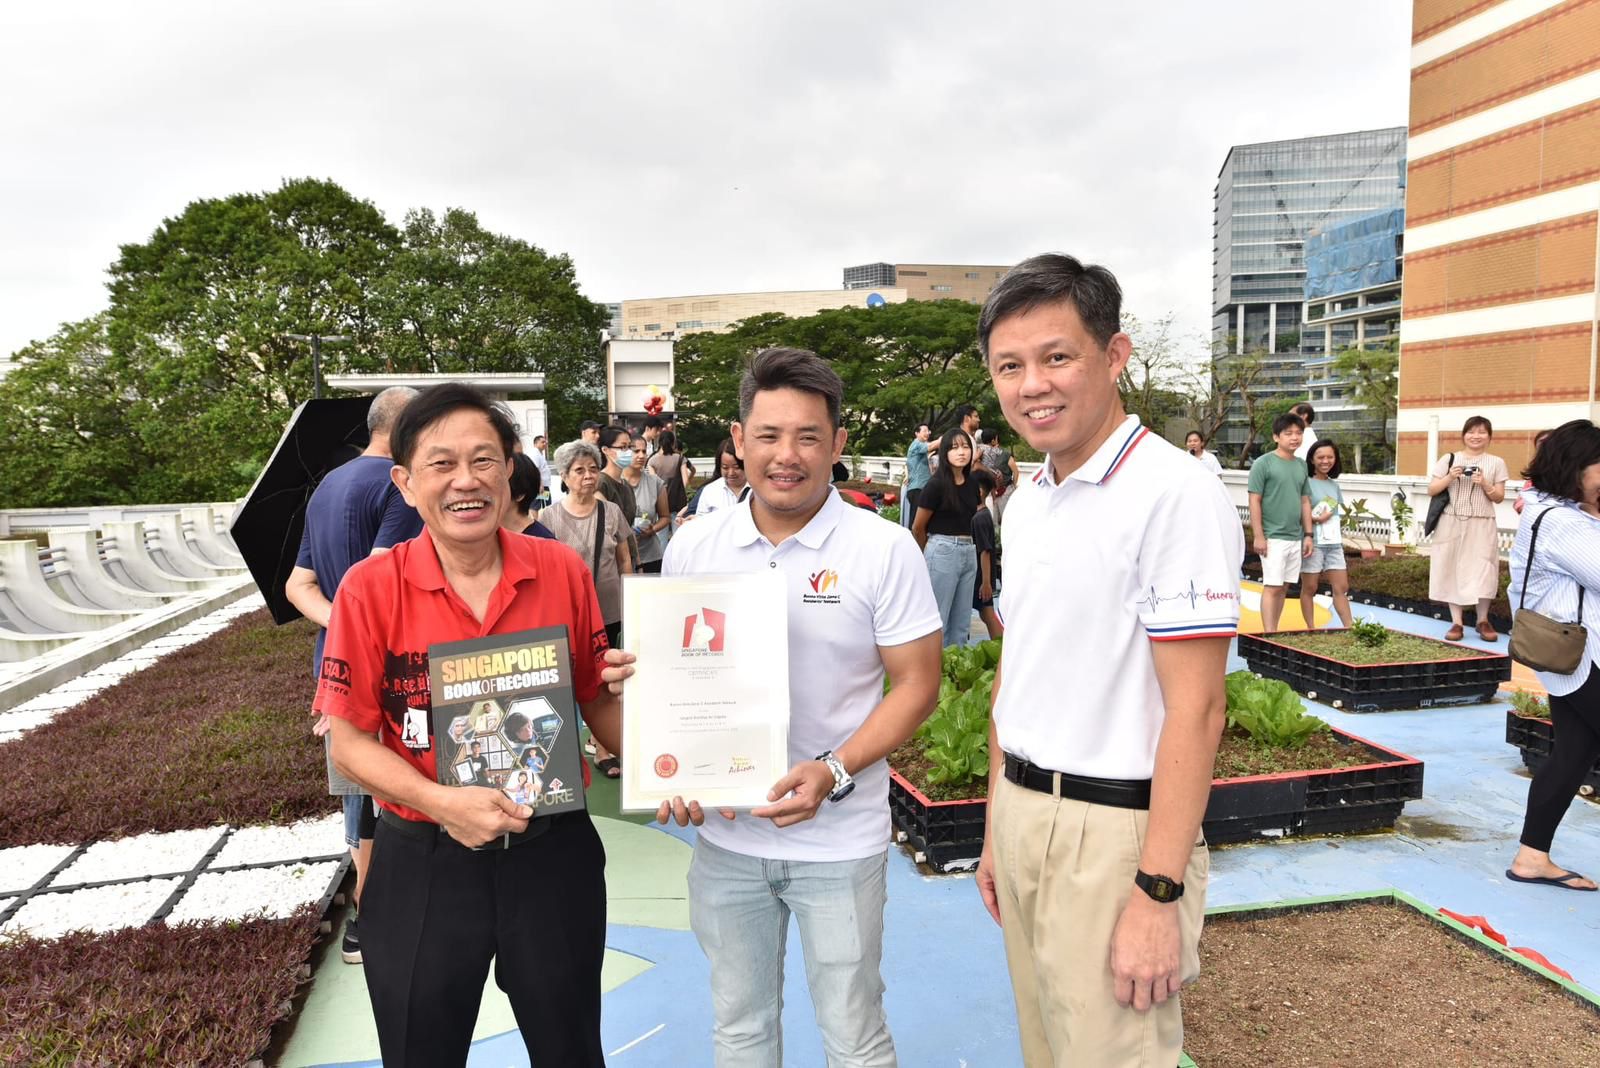 Presentation of the certificate to Chan Chun Sing and community volunteers